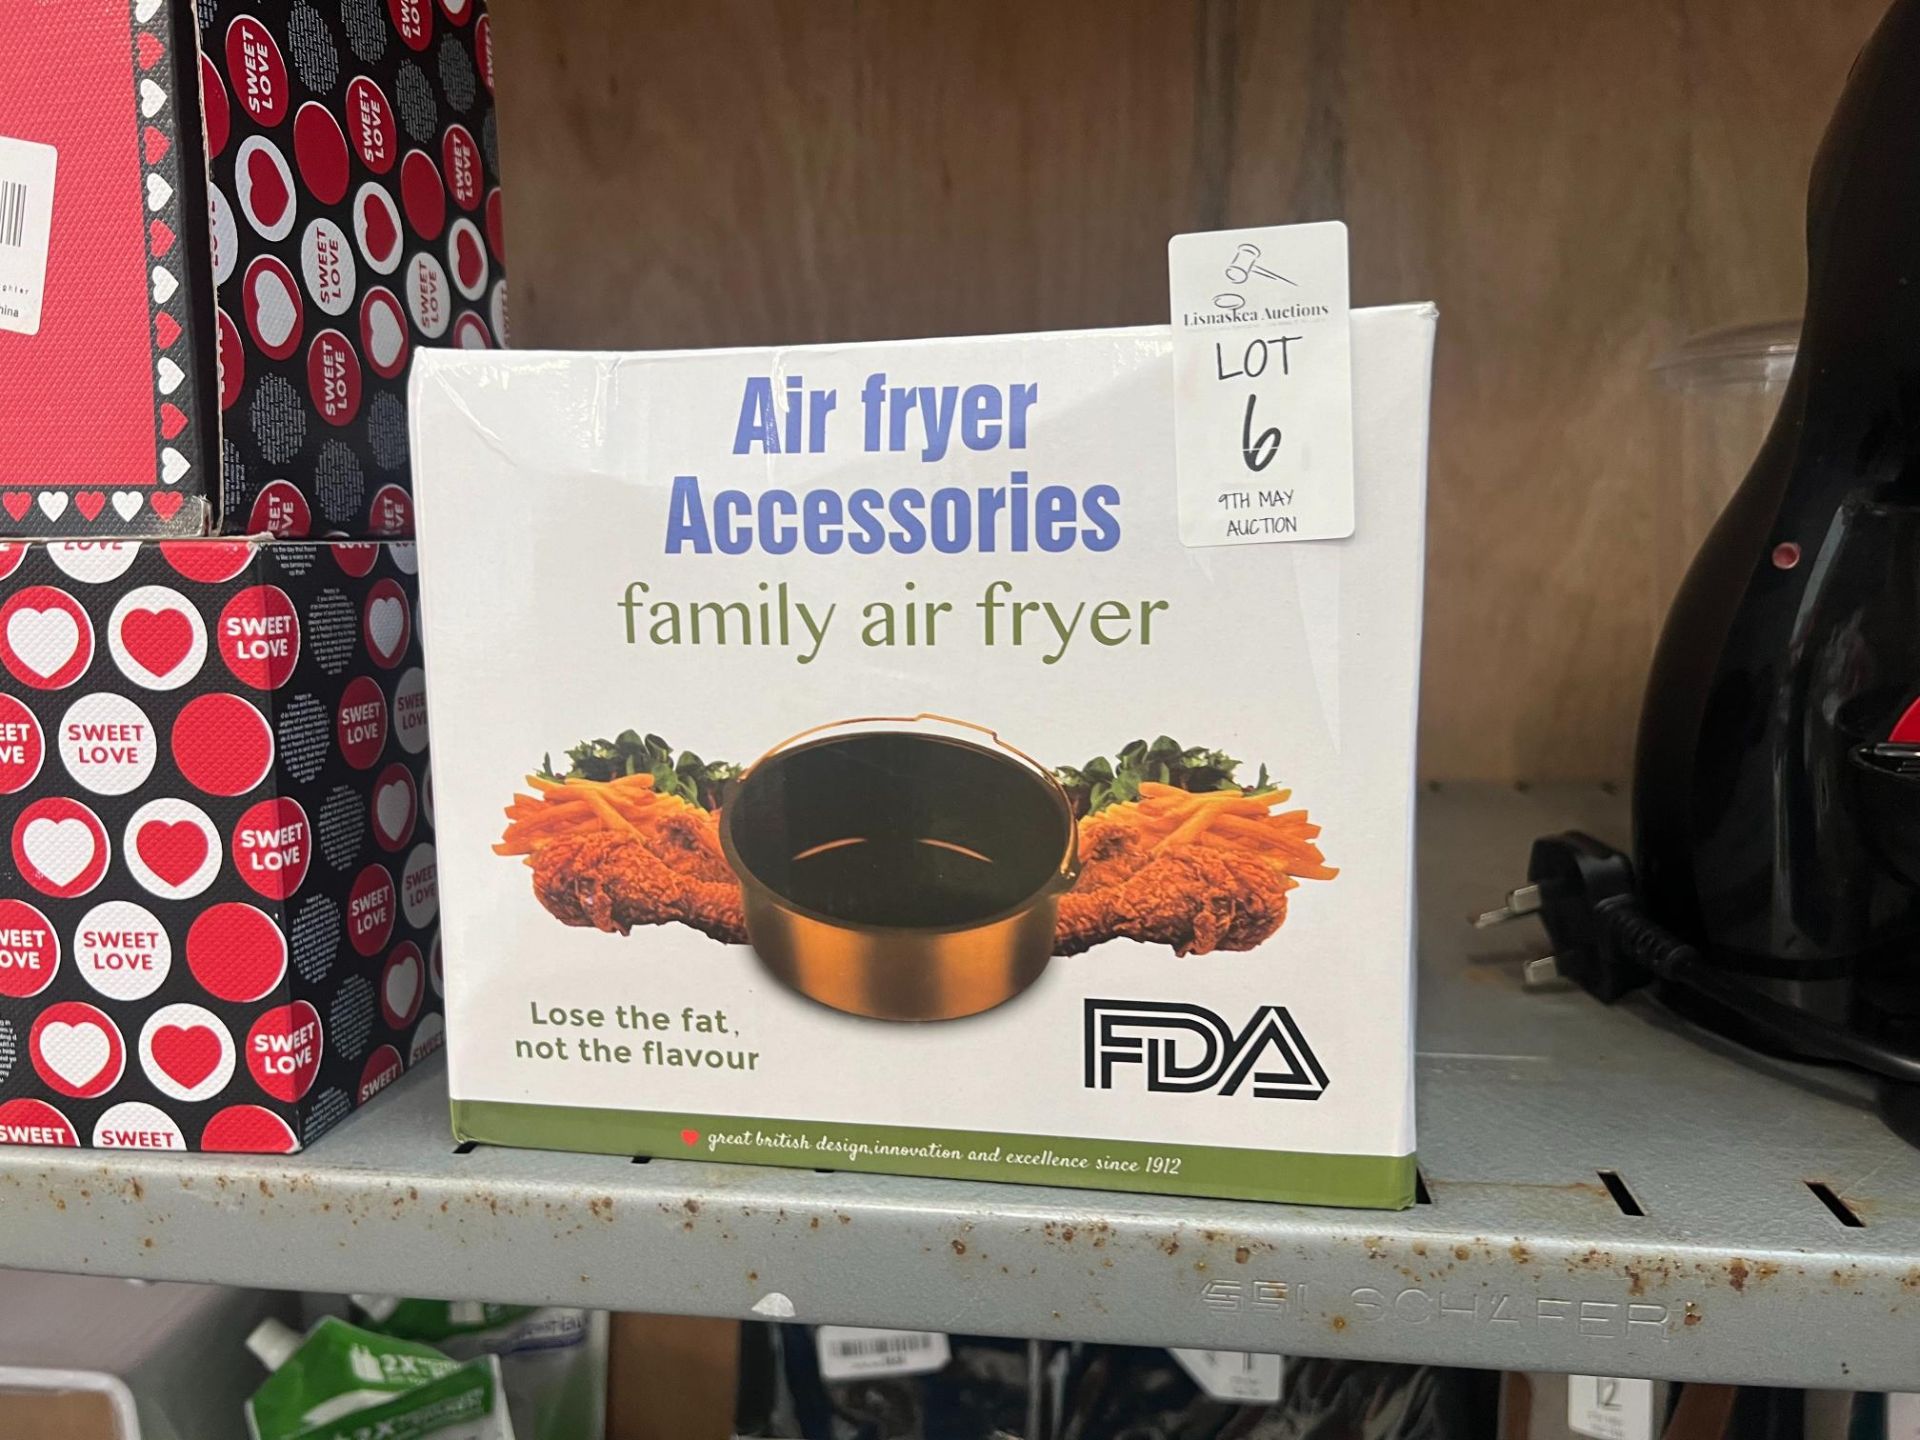 FDA FAMILY AIR FRYER ACCESSORY PACK